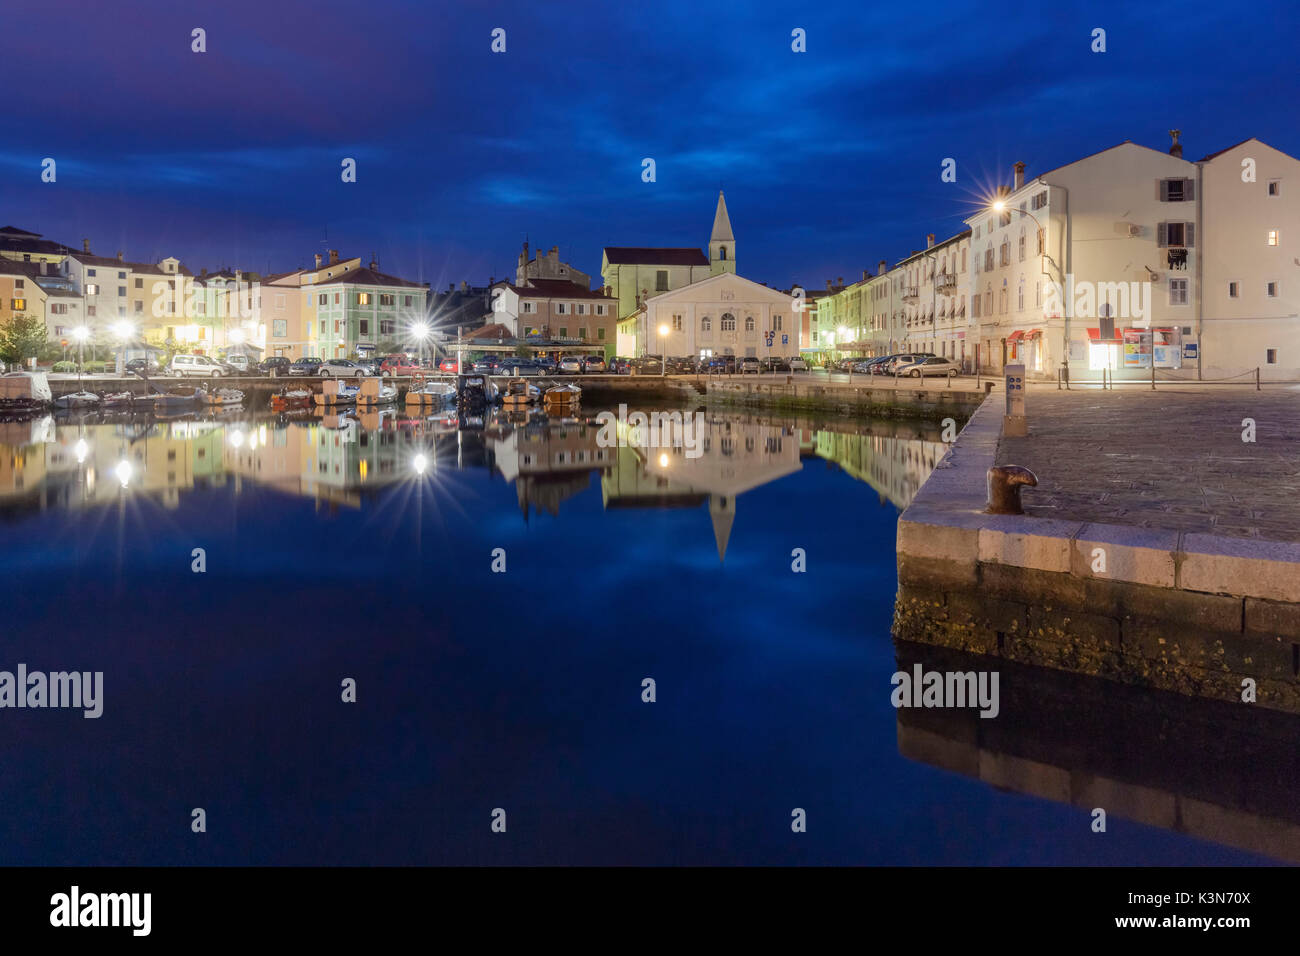 Europe, Slovenia, Primorska, Izola. Old town and the harbour with fishing boats at night Stock Photo